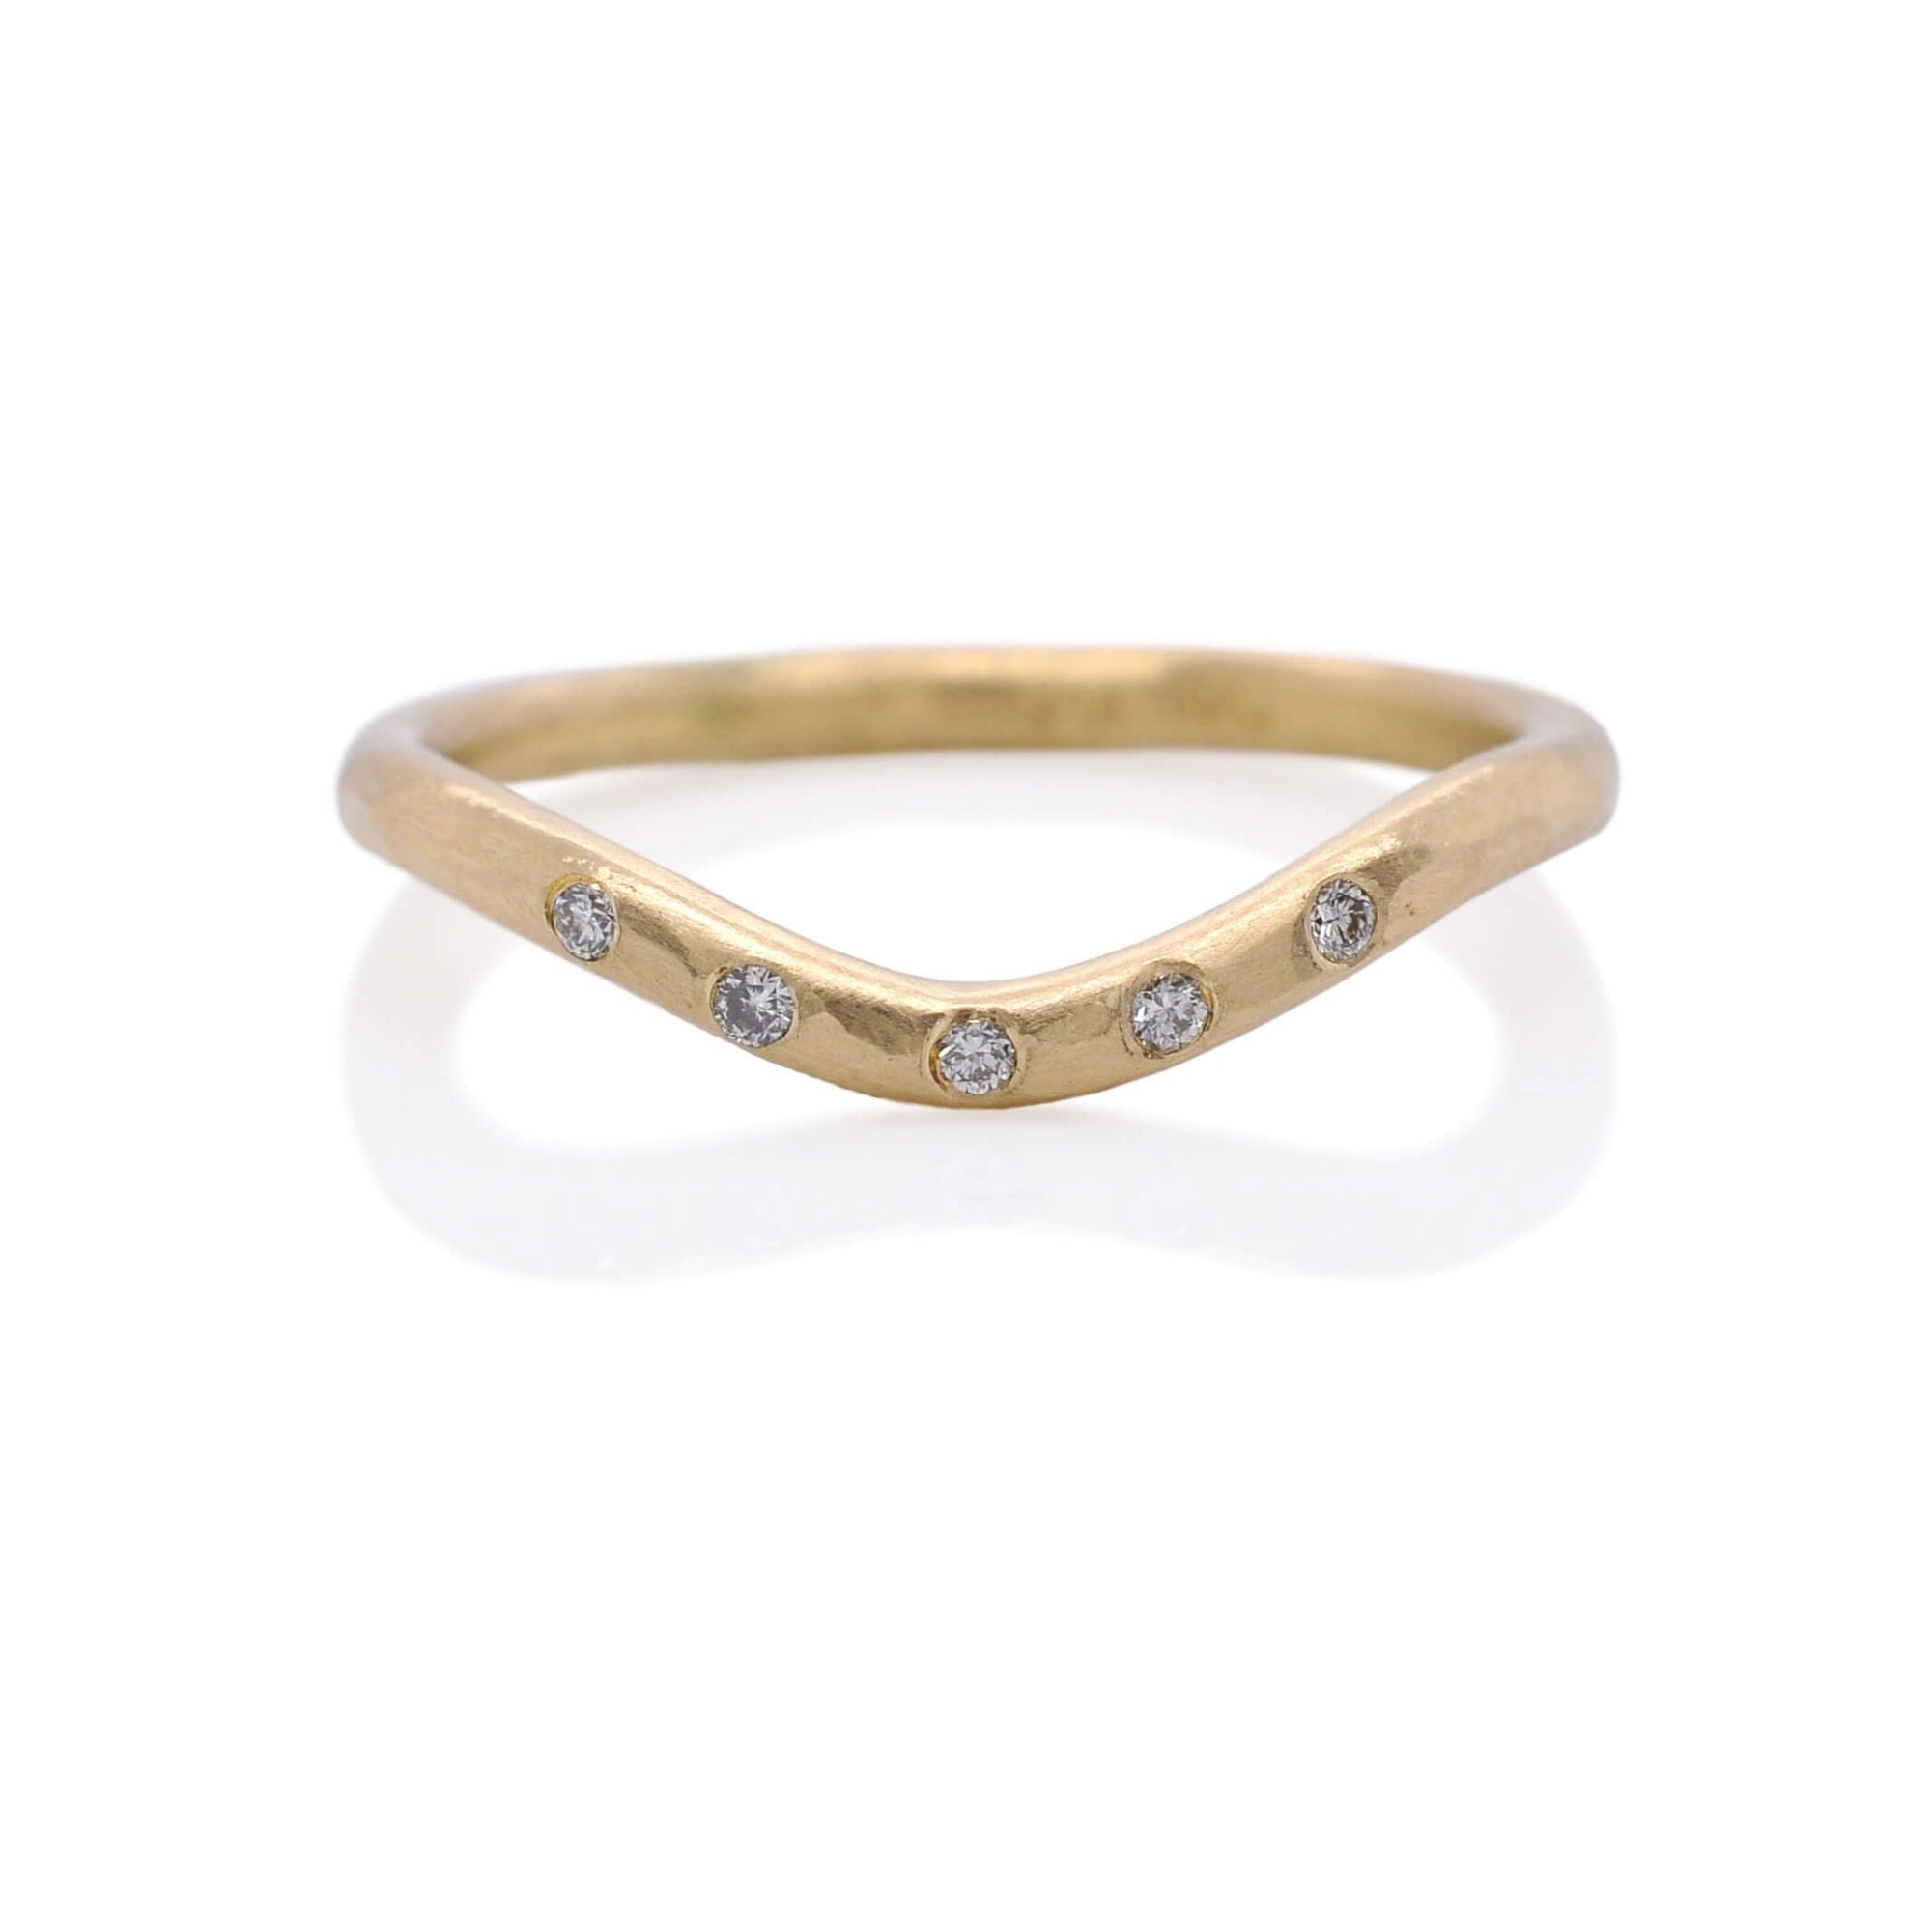 Contour diamond band in 14k yellow gold. Handmade by EC Design Jewelry in Minneapolis, MN using recycled metal and conflict-free stones.